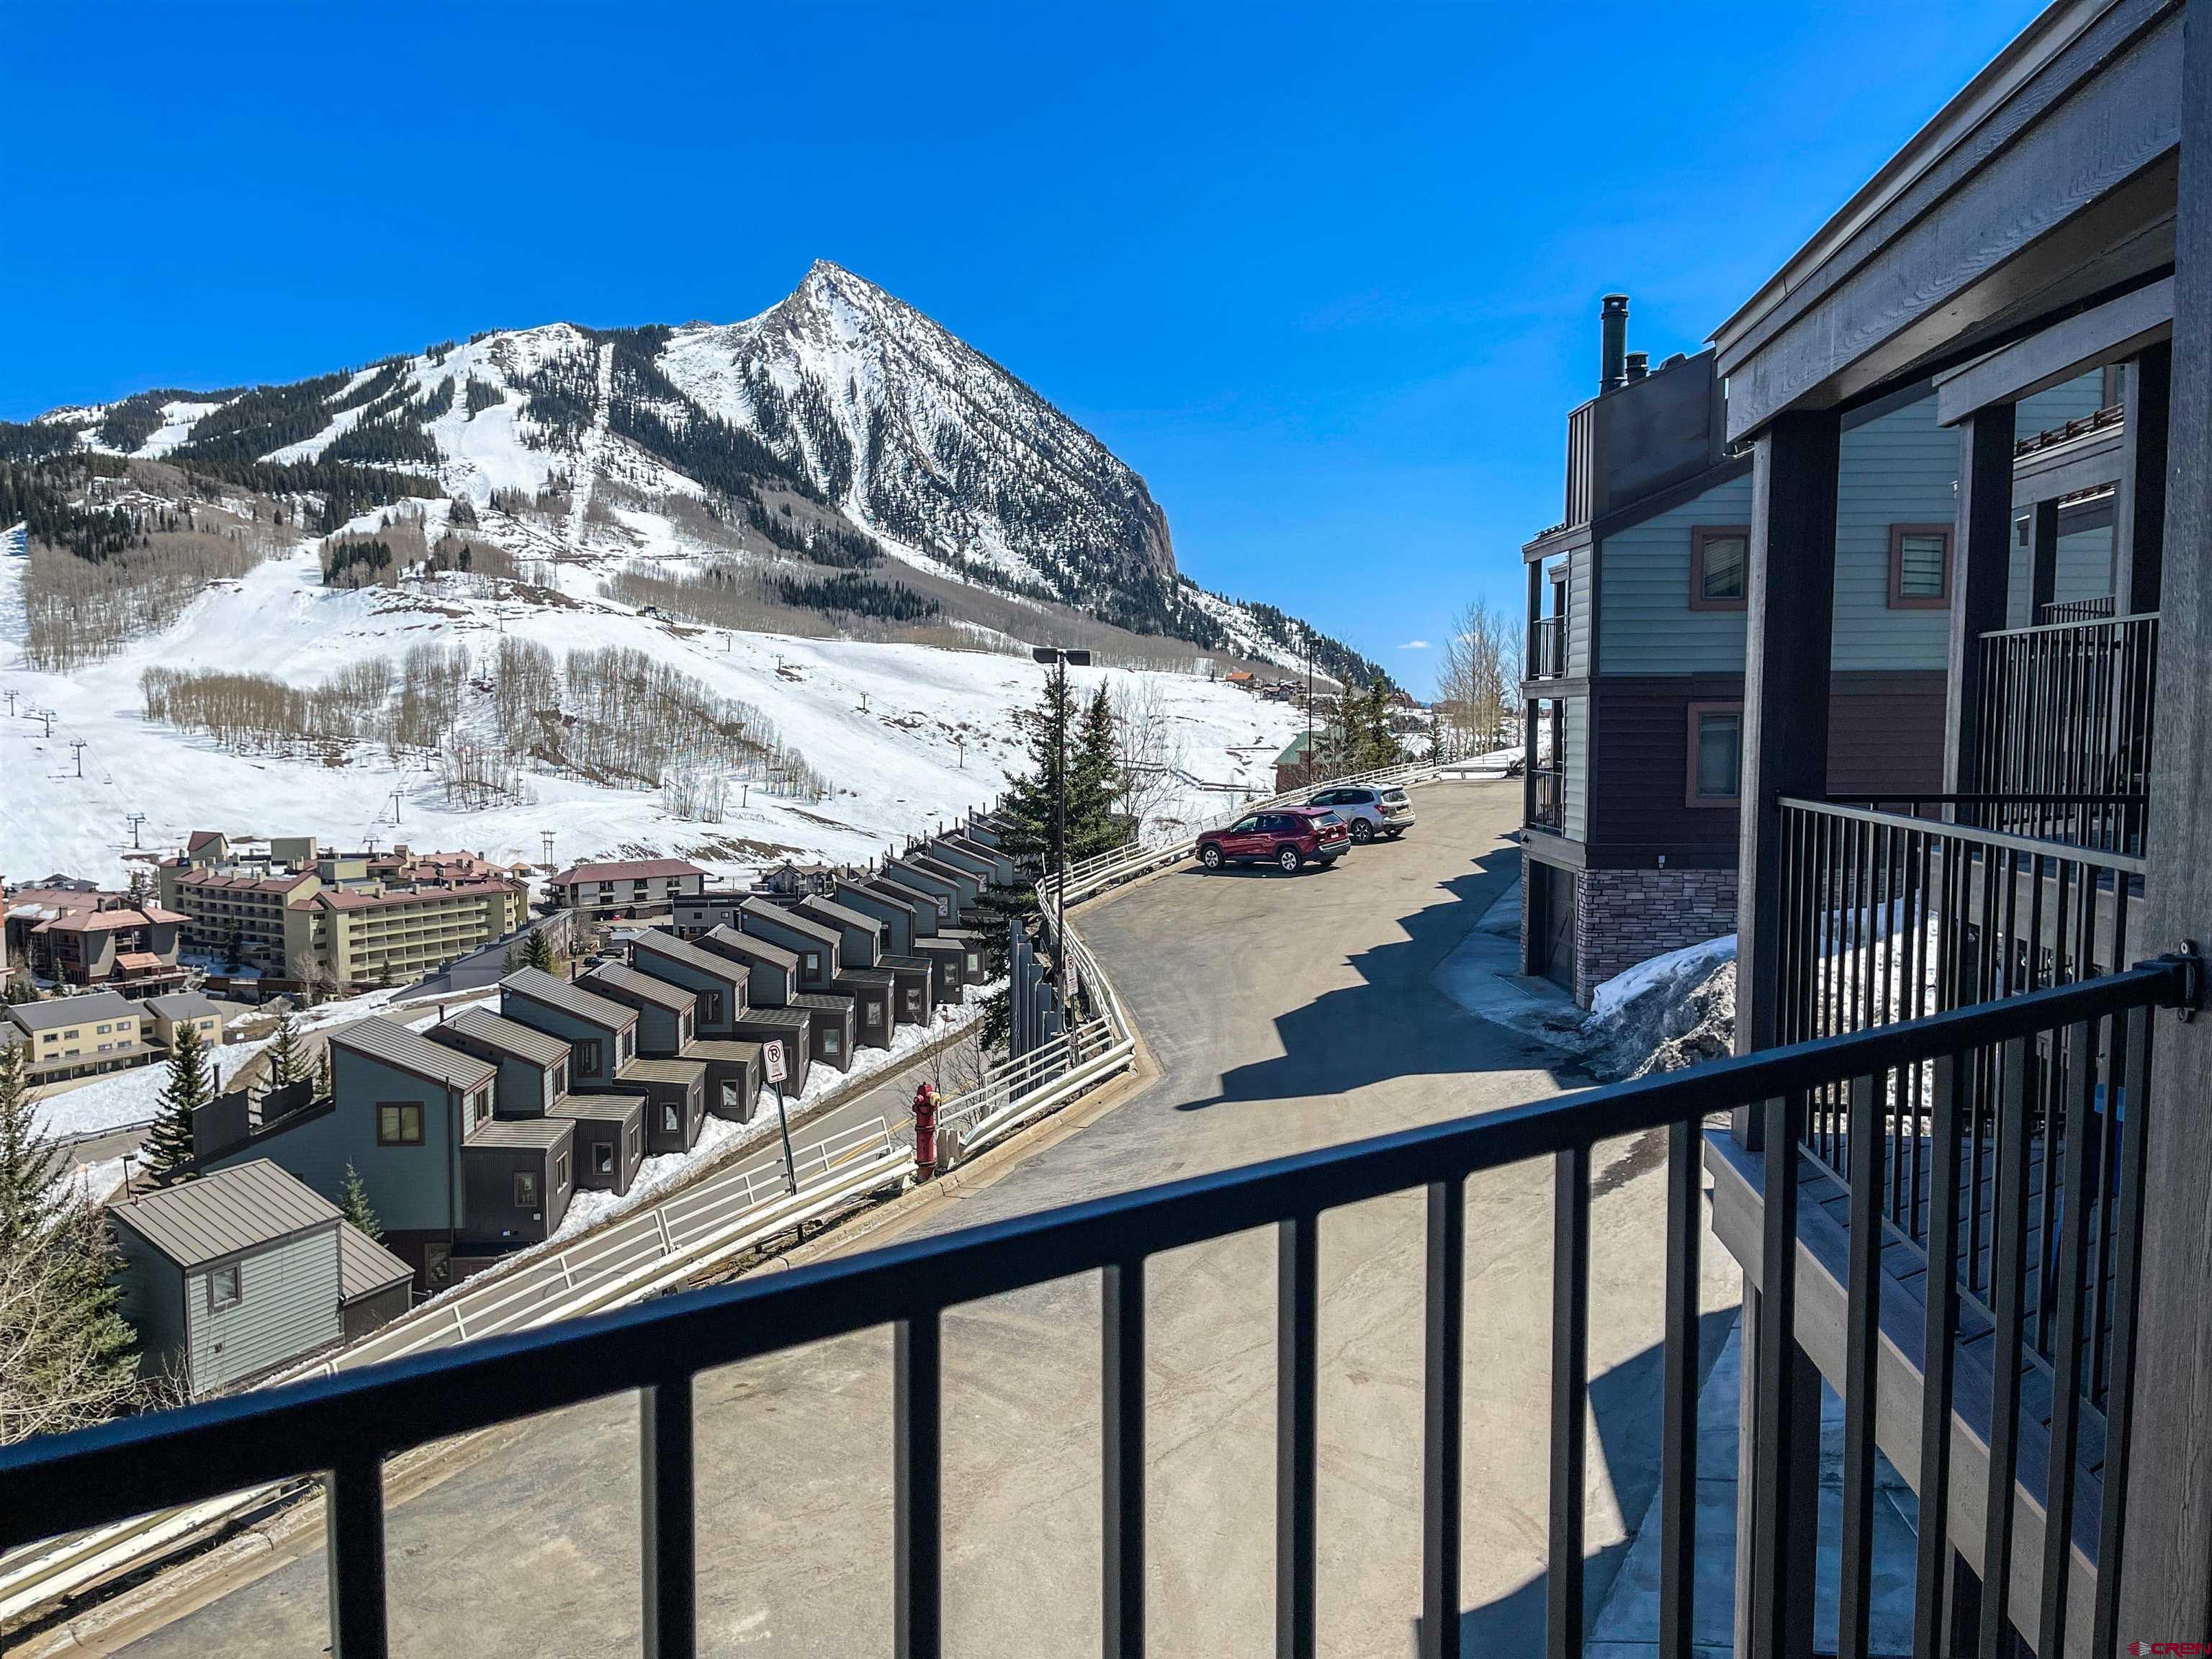 11 Morning Glory Way, Mt. Crested Butte, CO 81225